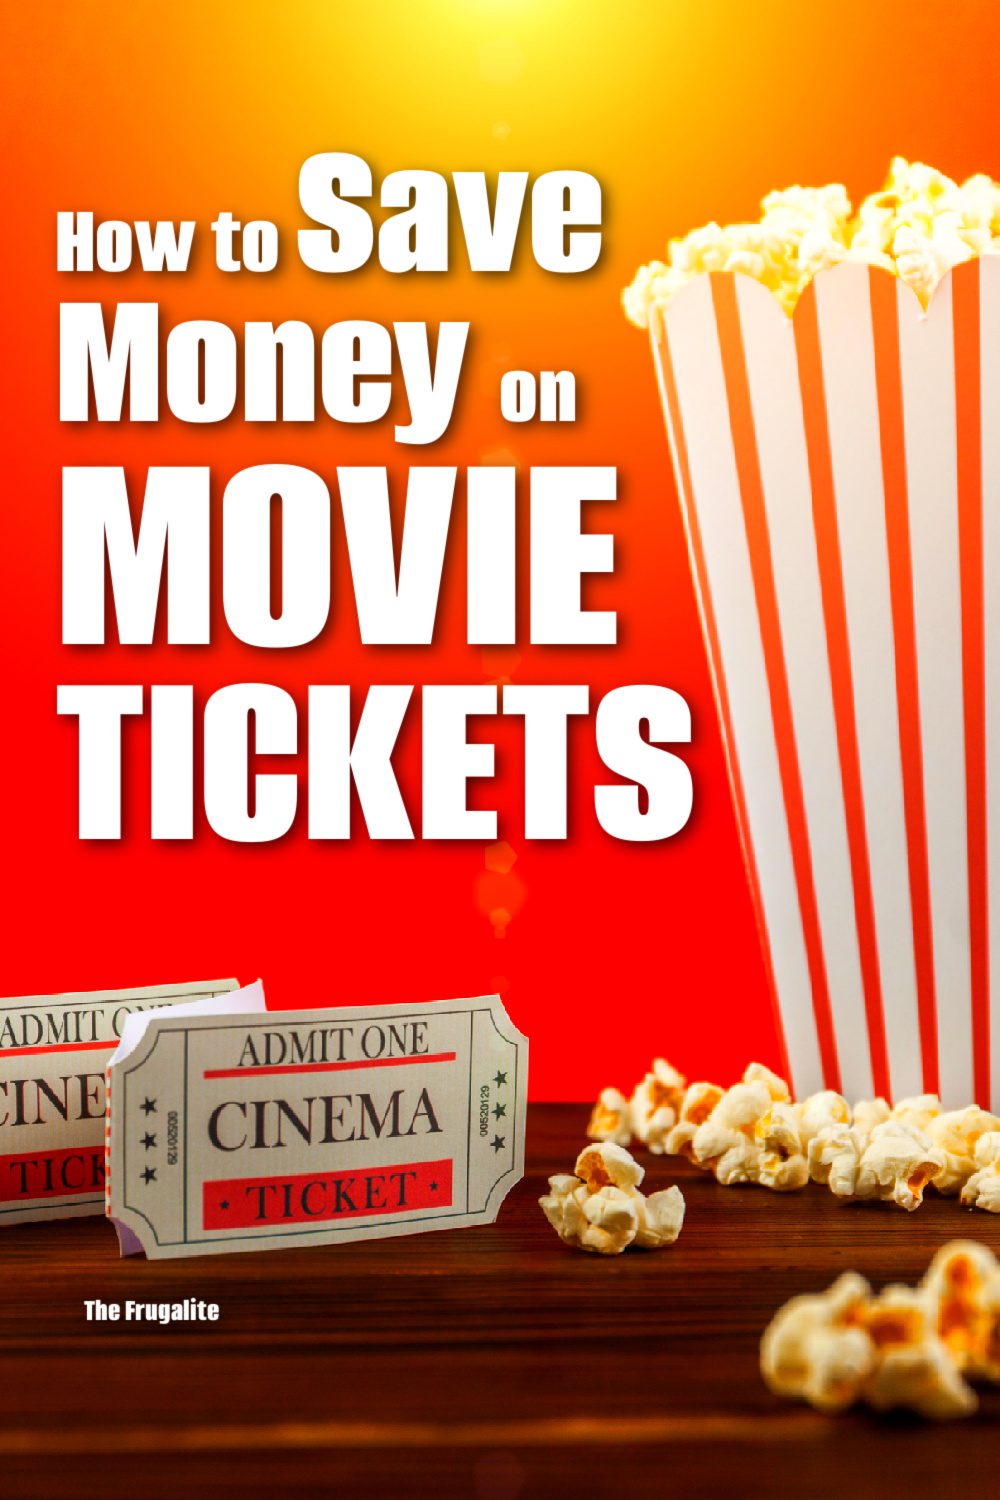 How to Save Money On Movie Tickets